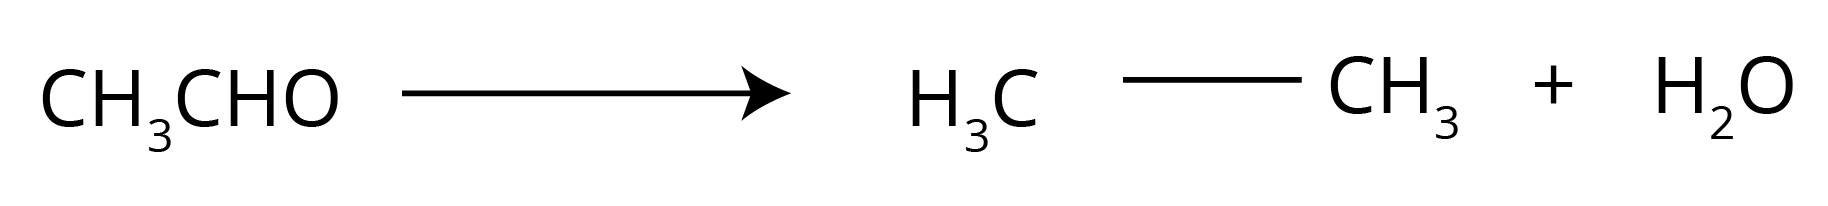 Acetaldehyde is converted to ethane